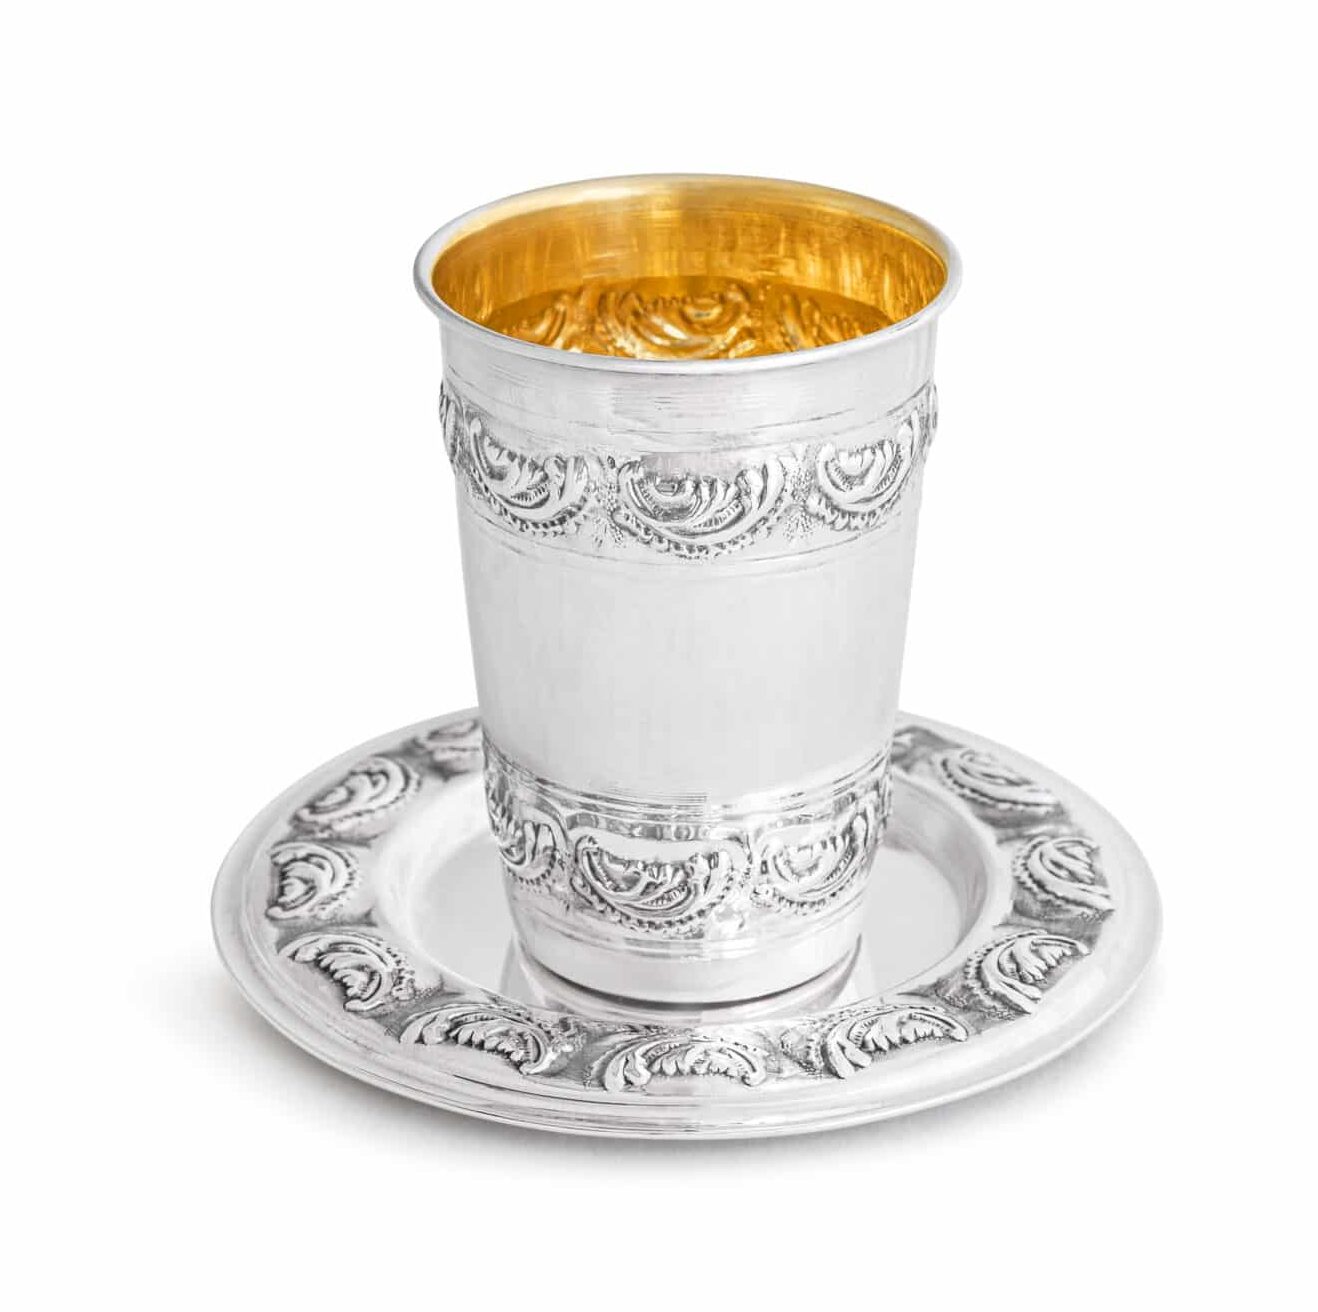 Vintage style kiddush Cup & Plate Sterling Silver 925